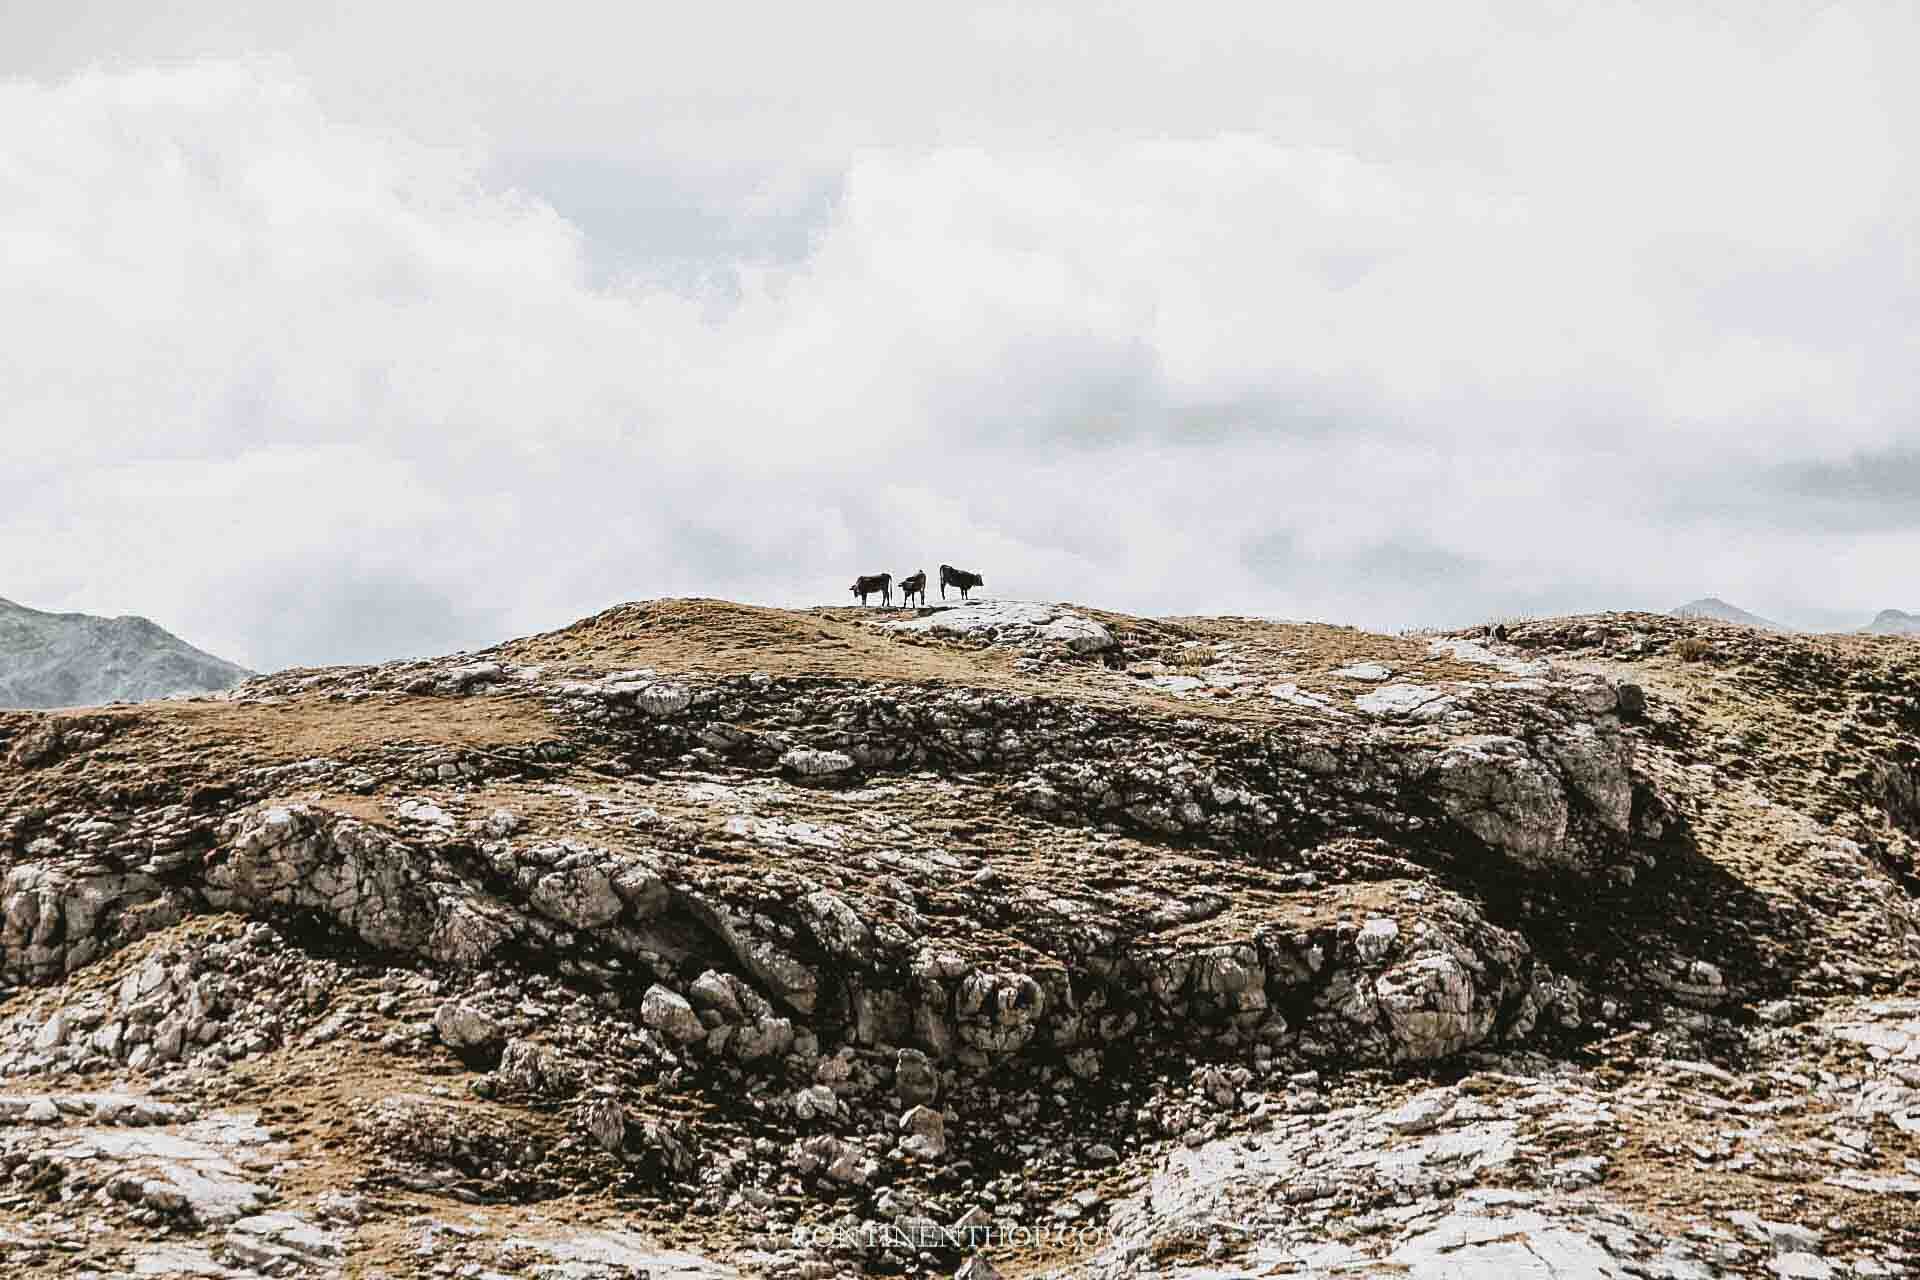 cattle in picos de europa - things to do in santander spain